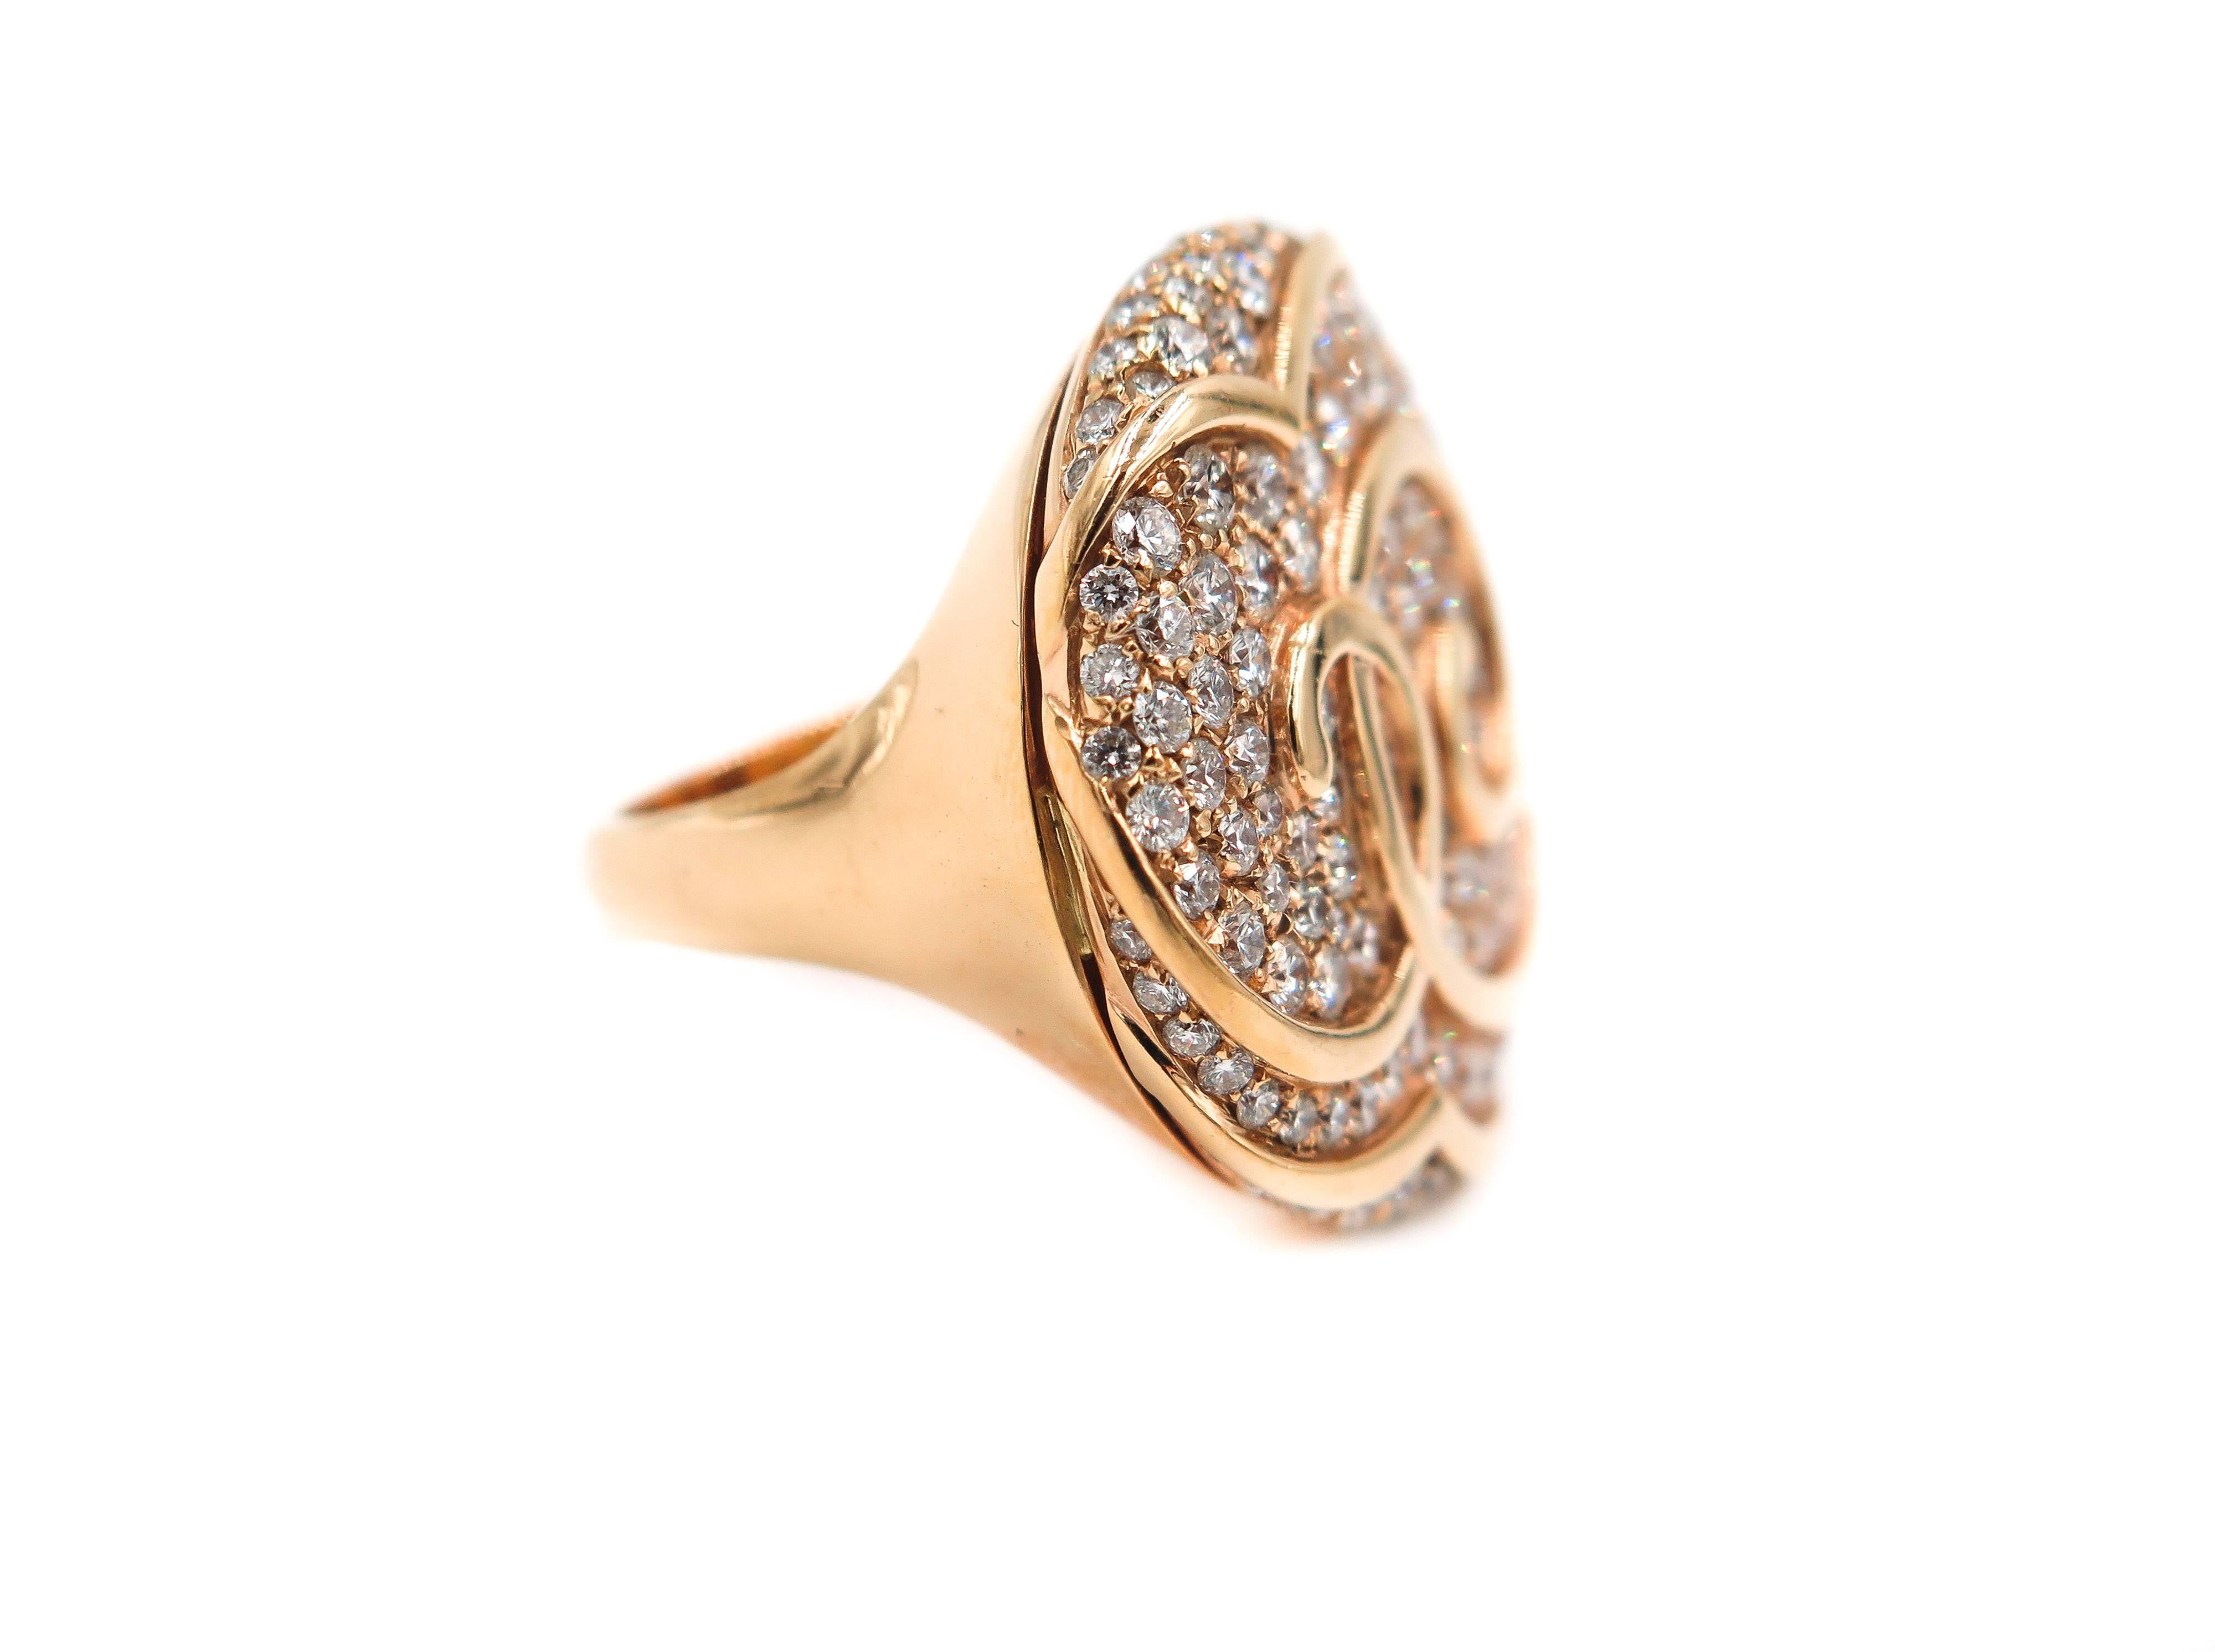 Excitement, amazement and surprise are just a few of the emotions evoked by this amazing ring!
Handcrafted in 18k rose gold and paved white round diamonds, totaling 2.80 carats.
The swirling pattern evokes a sense of fluidity and depth, perfect for